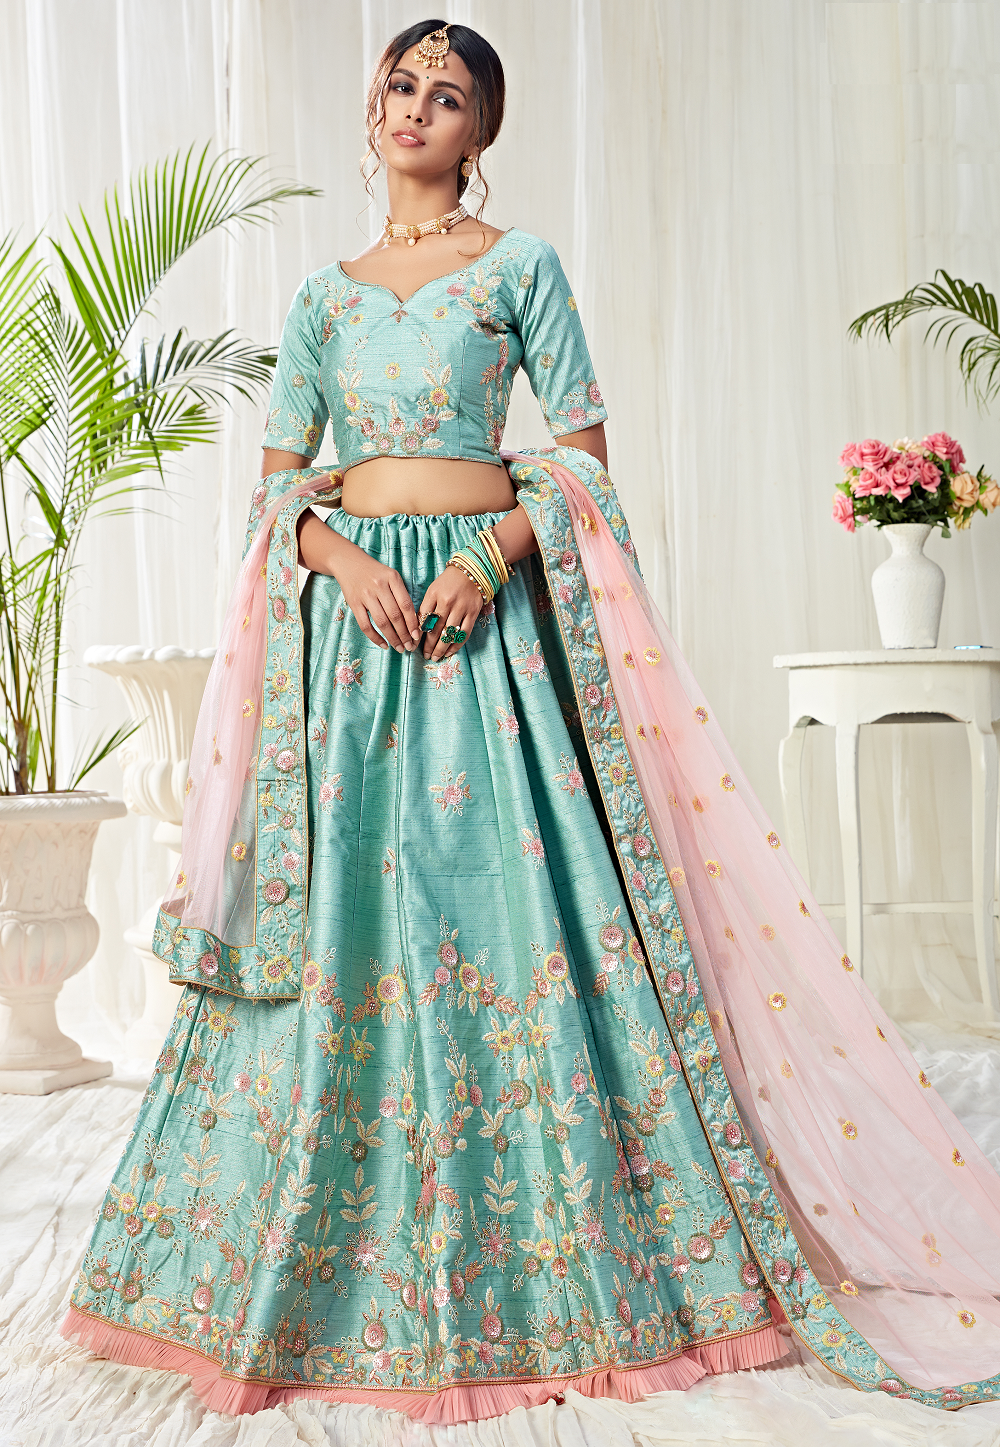 Embroidered Mulberry Silk Lehenga in Sky Blue